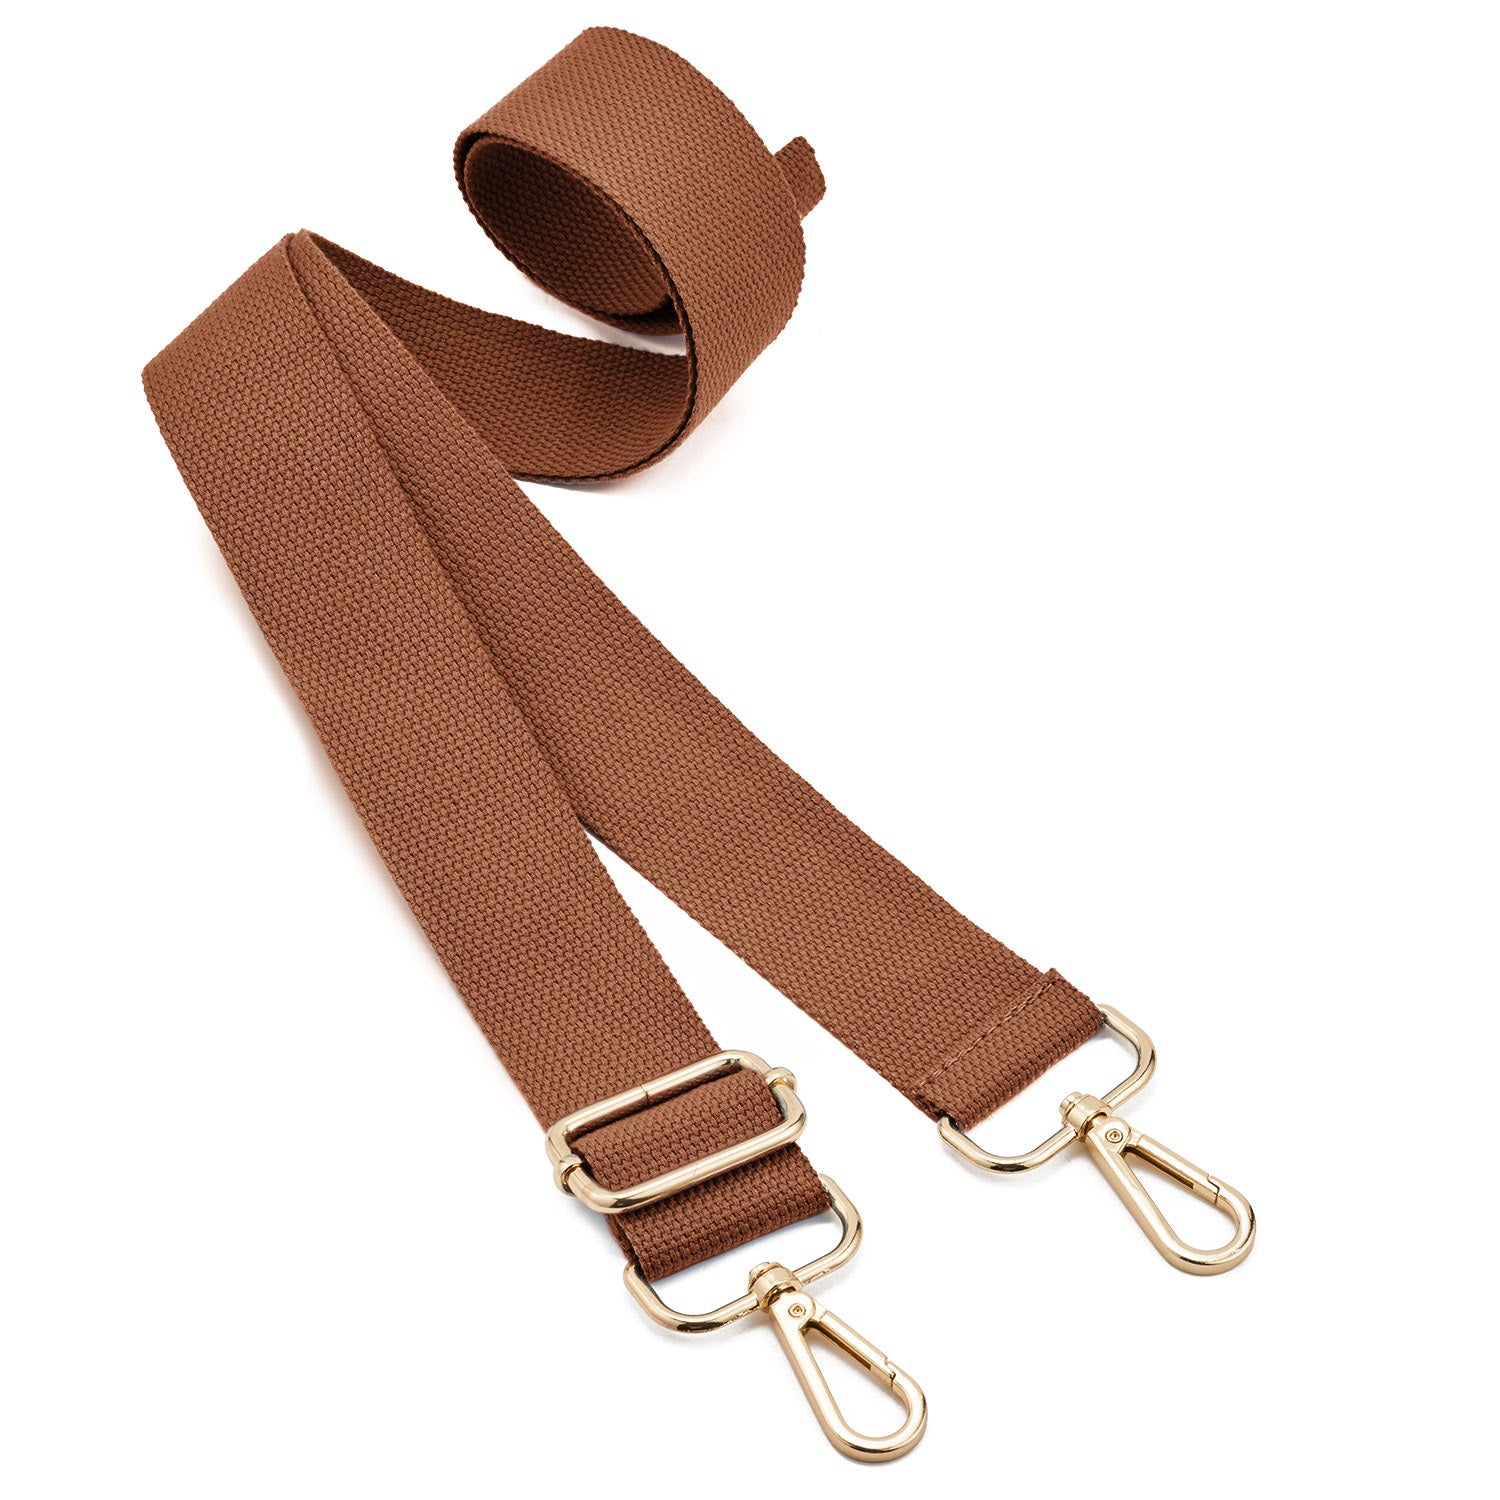 Xzyden Purse Strap, 4cm Wide Purse Straps Replacement Dual Leather Ended Bag Strap with 360 Rotatable Buckle Adjustable Lengt